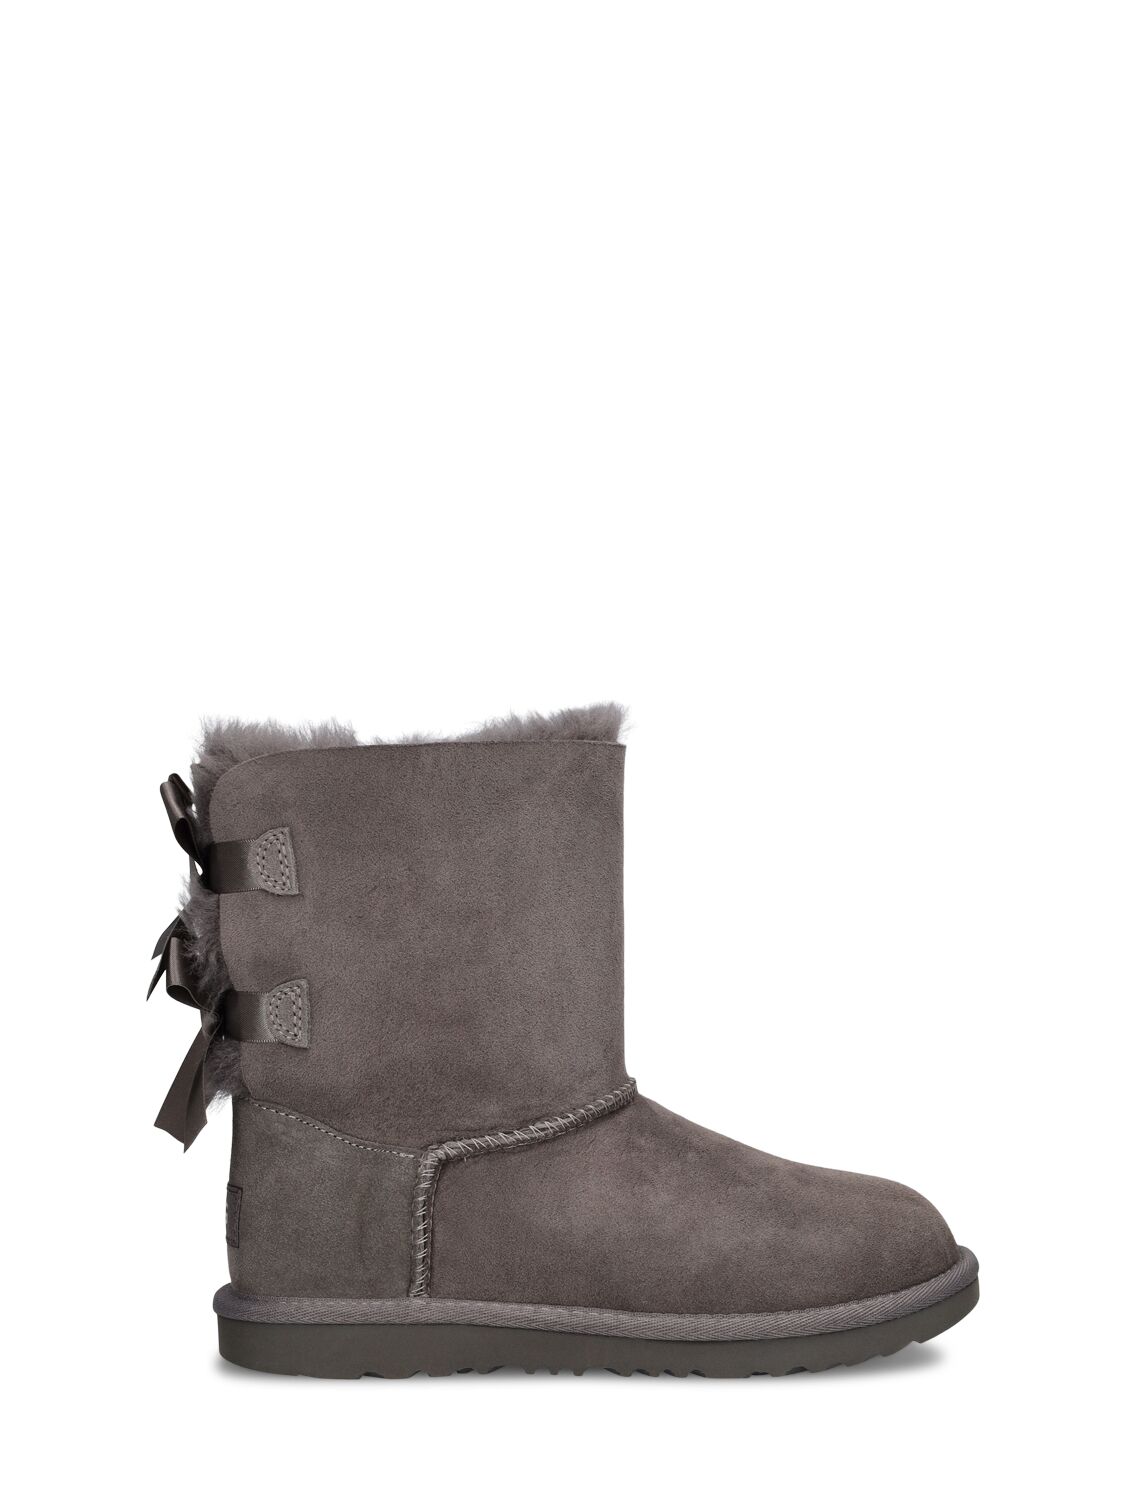 Ugg Kids' Girls' Bailey Bow Ii Shearling Boots - Toddler In Grey